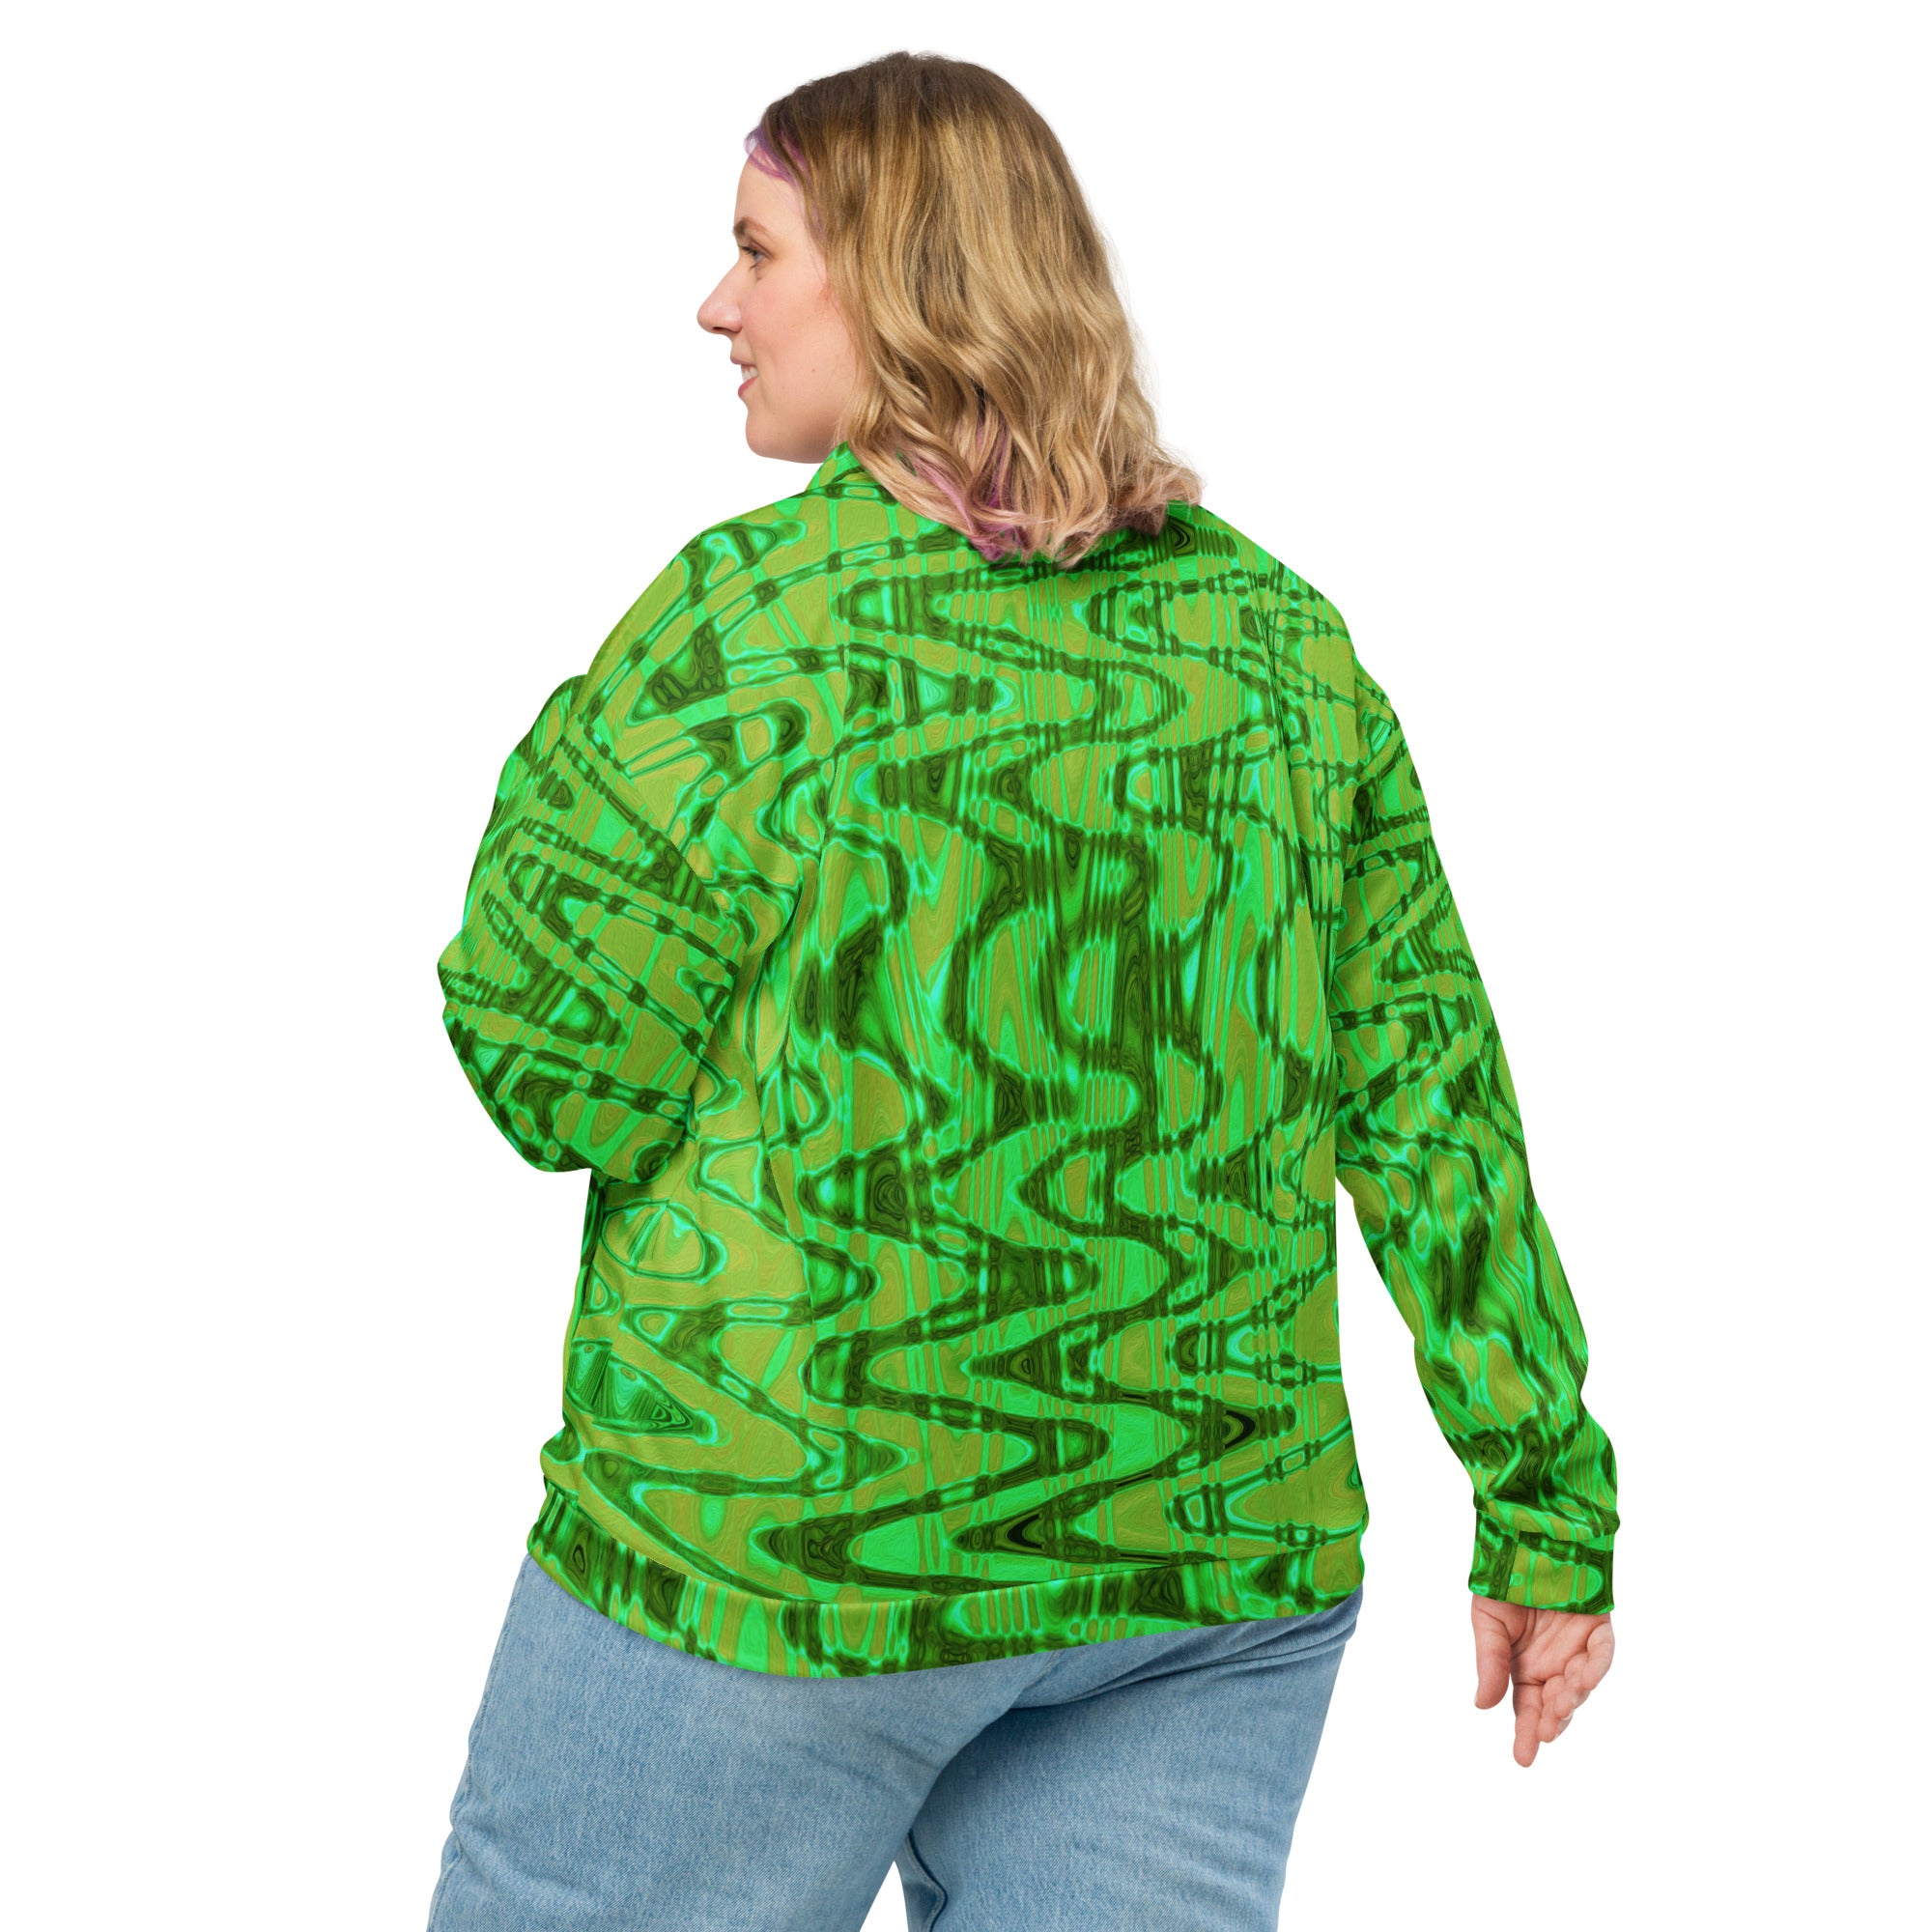 Unisex Bomber Jacket | Cool Green and Gold Abstract Tie Dye Retro Waves